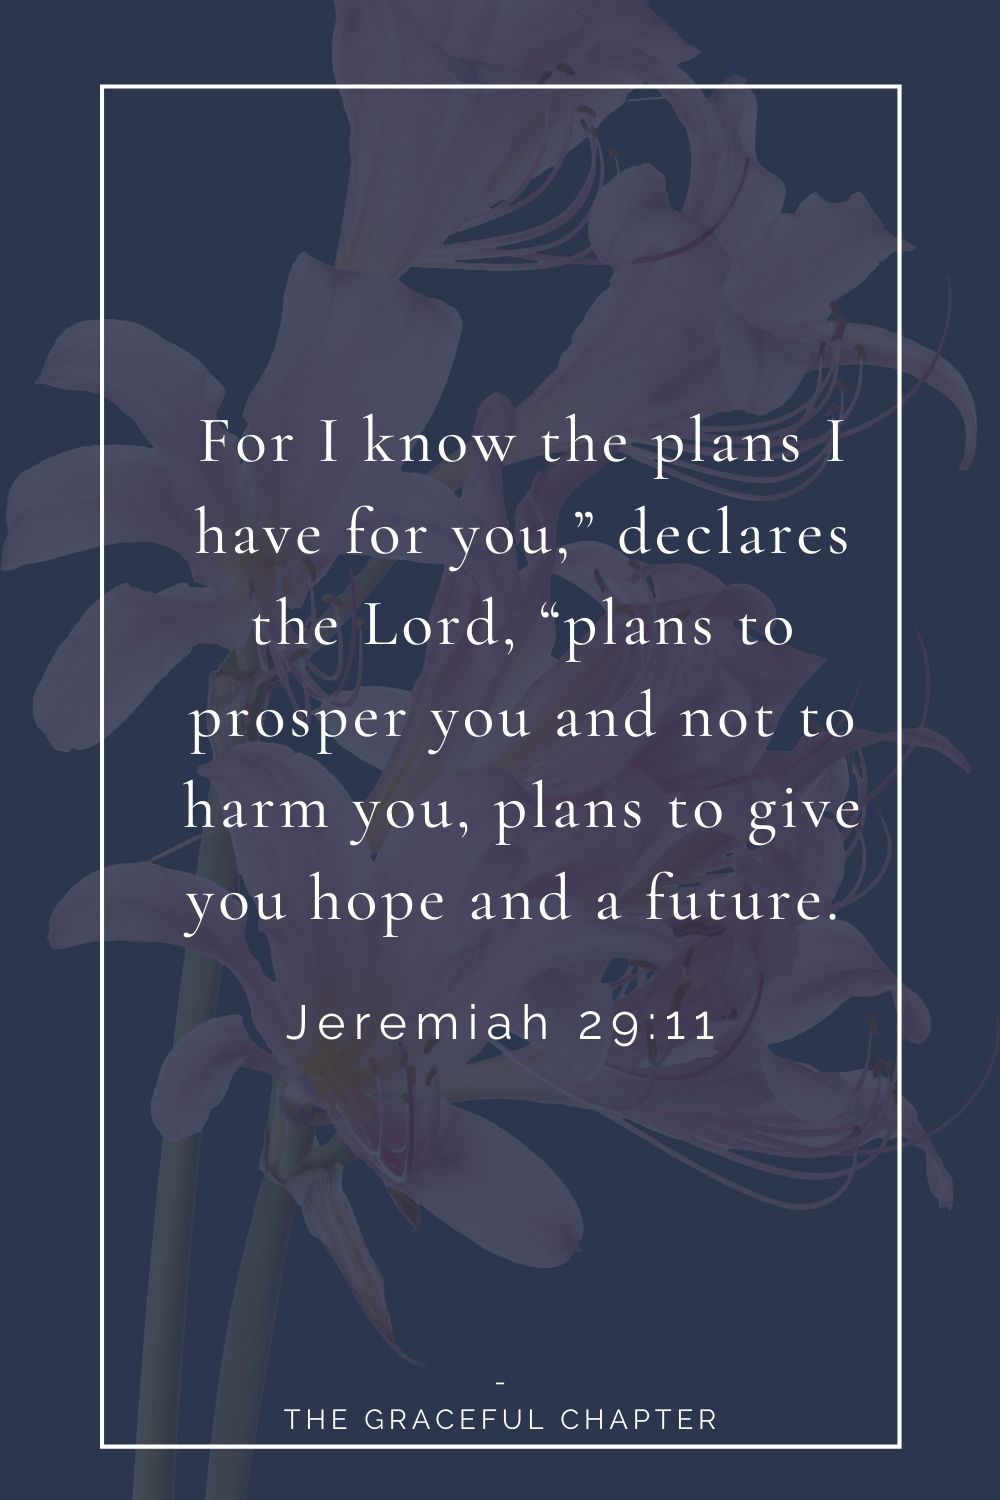 For I know the plans I have for you,” declares the Lord, “plans to prosper you and not to harm you, plans to give you hope and a future.  Jeremiah 29:11